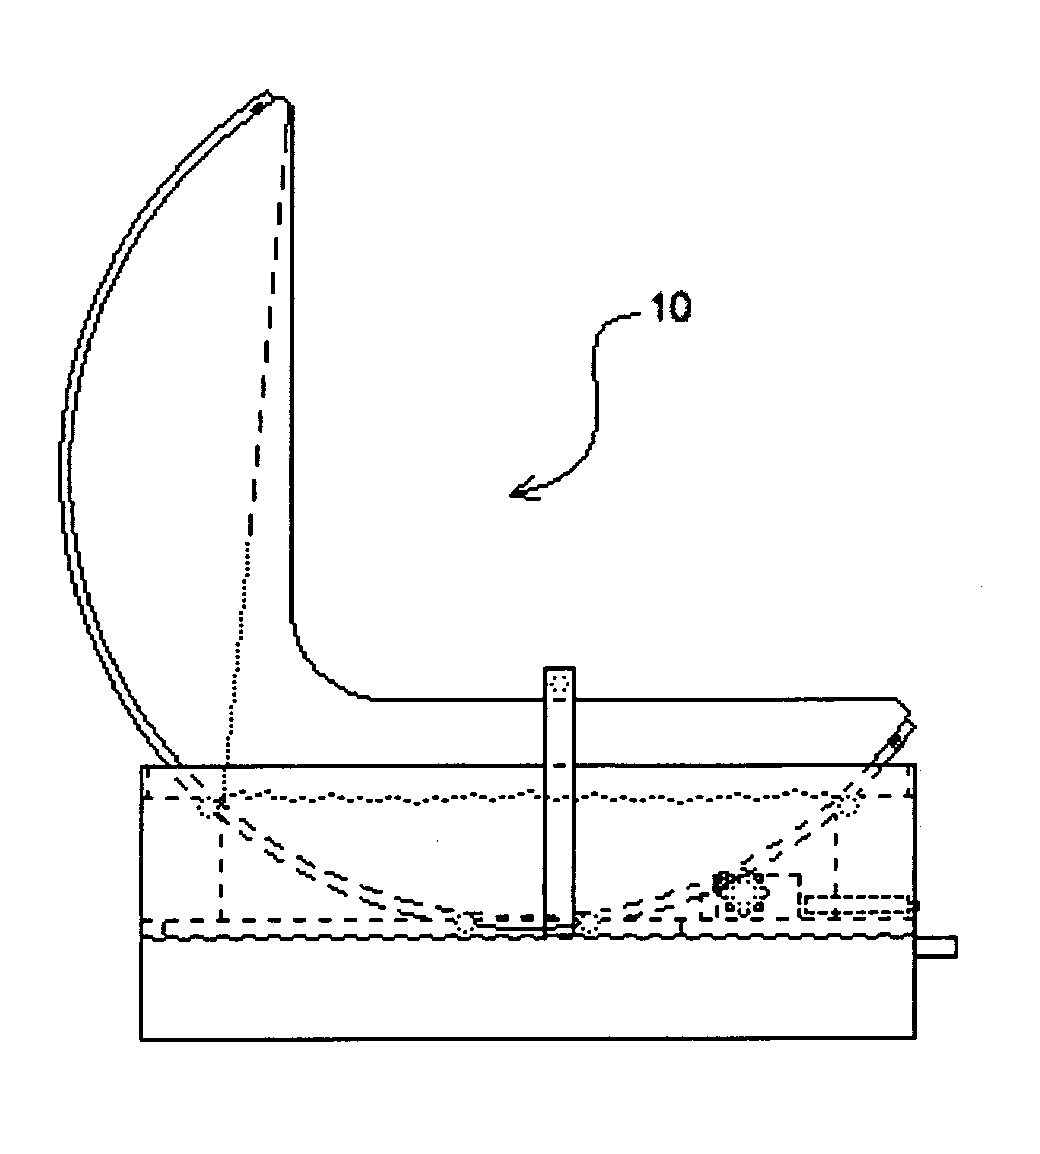 Apparatus for a litter box